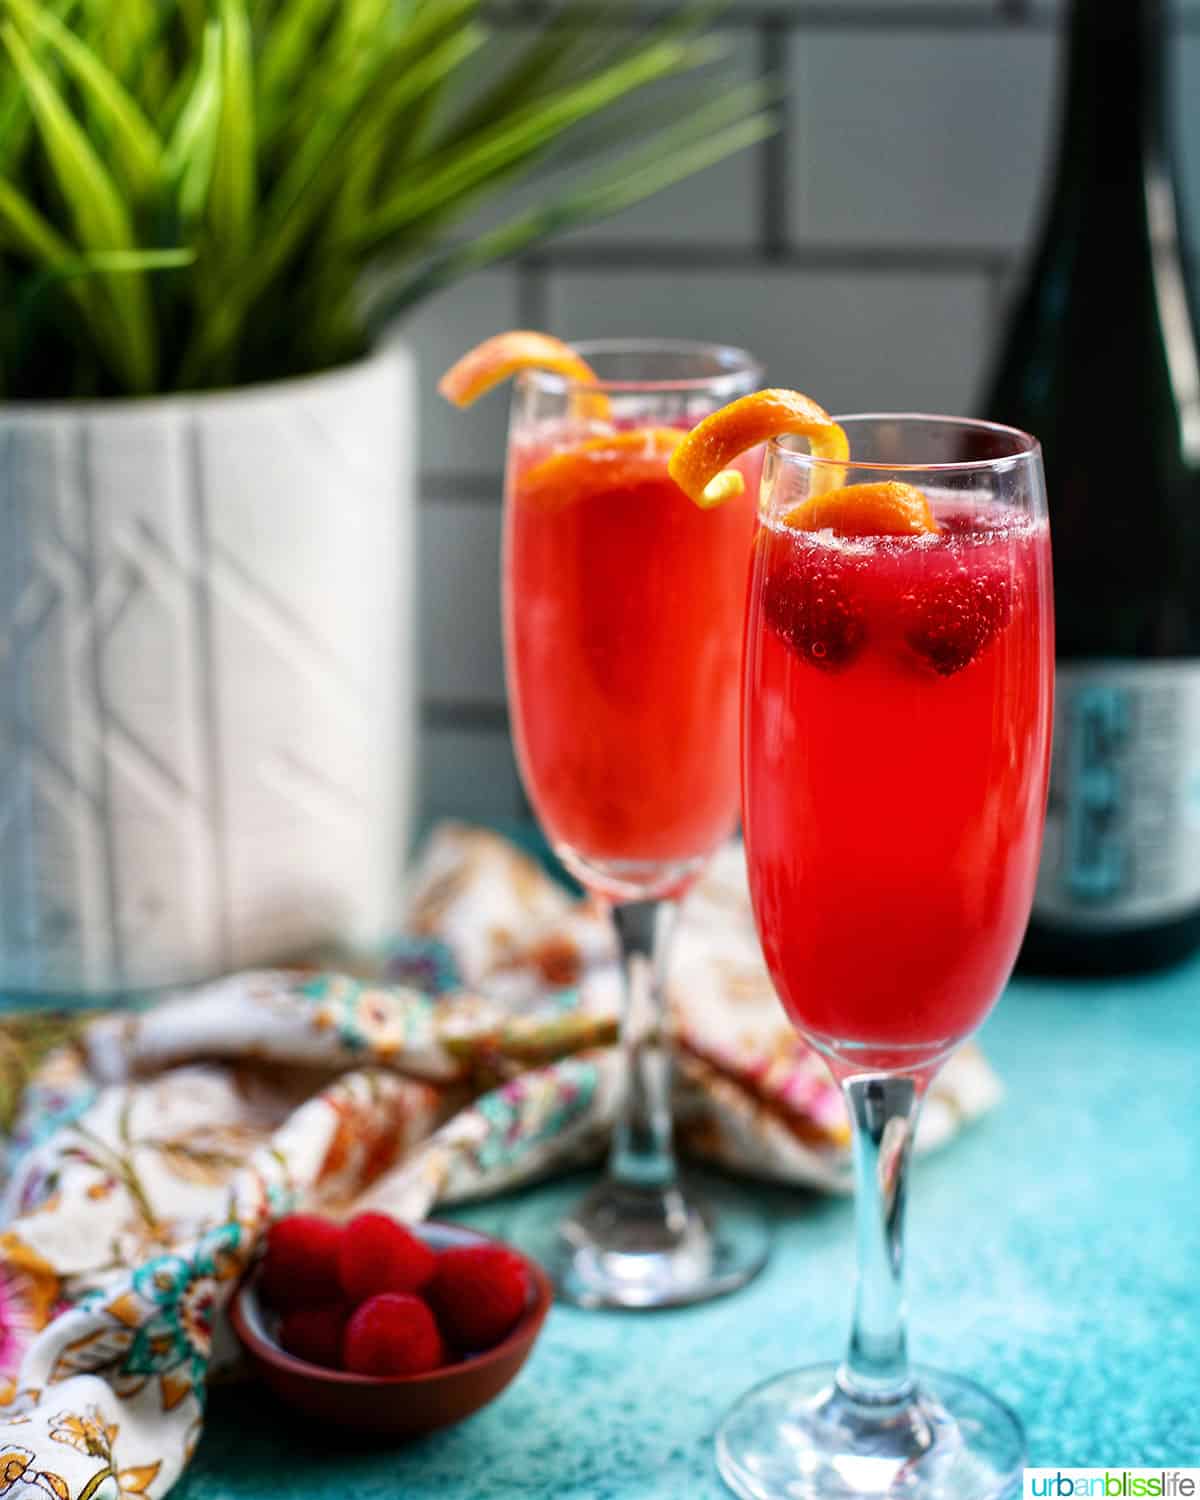 two glasses of Raspberry Mimosas Raspberry Mimosa with raspberries and orange rind garnish with white vase and green plant and sparkling wine bottle in background.